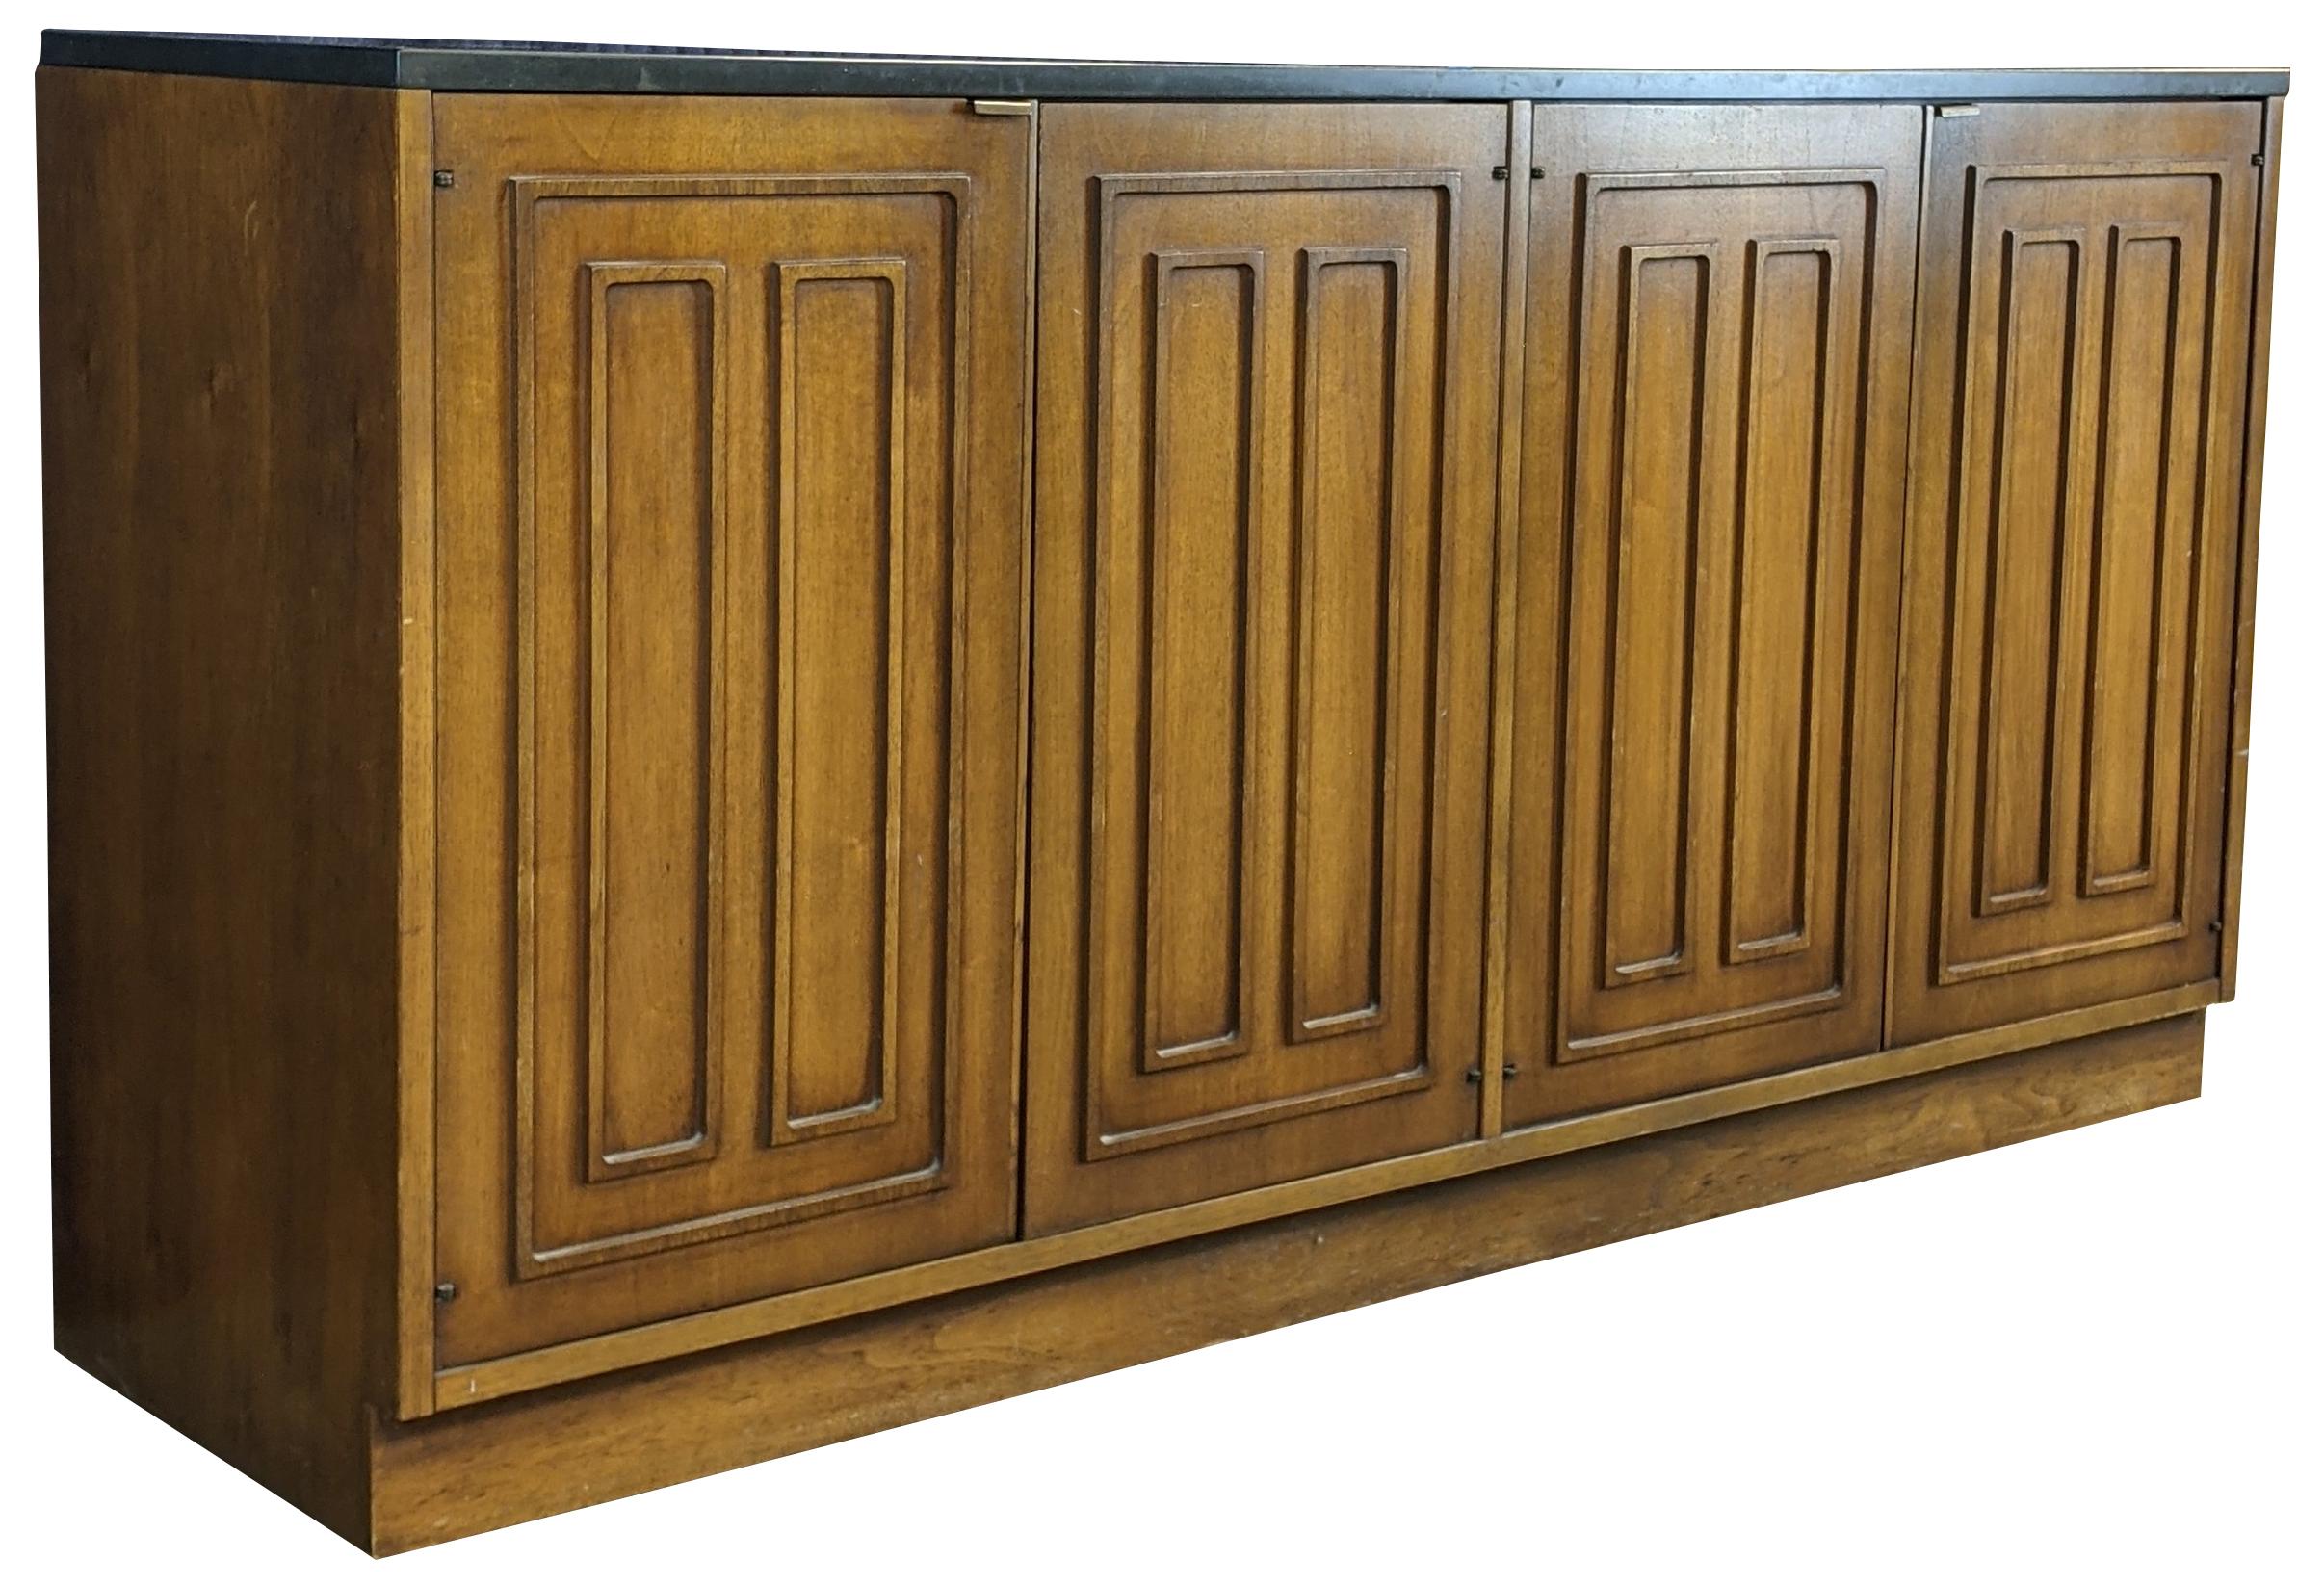 Broyhill Premier Sculptra collection buffet or credenza, circa 1960s. Made of walnut with slate top and Mid-Century Modern styling. The bottom doors open to reveal four drawers, three shelves, and a silverware / flatware drawer.
              